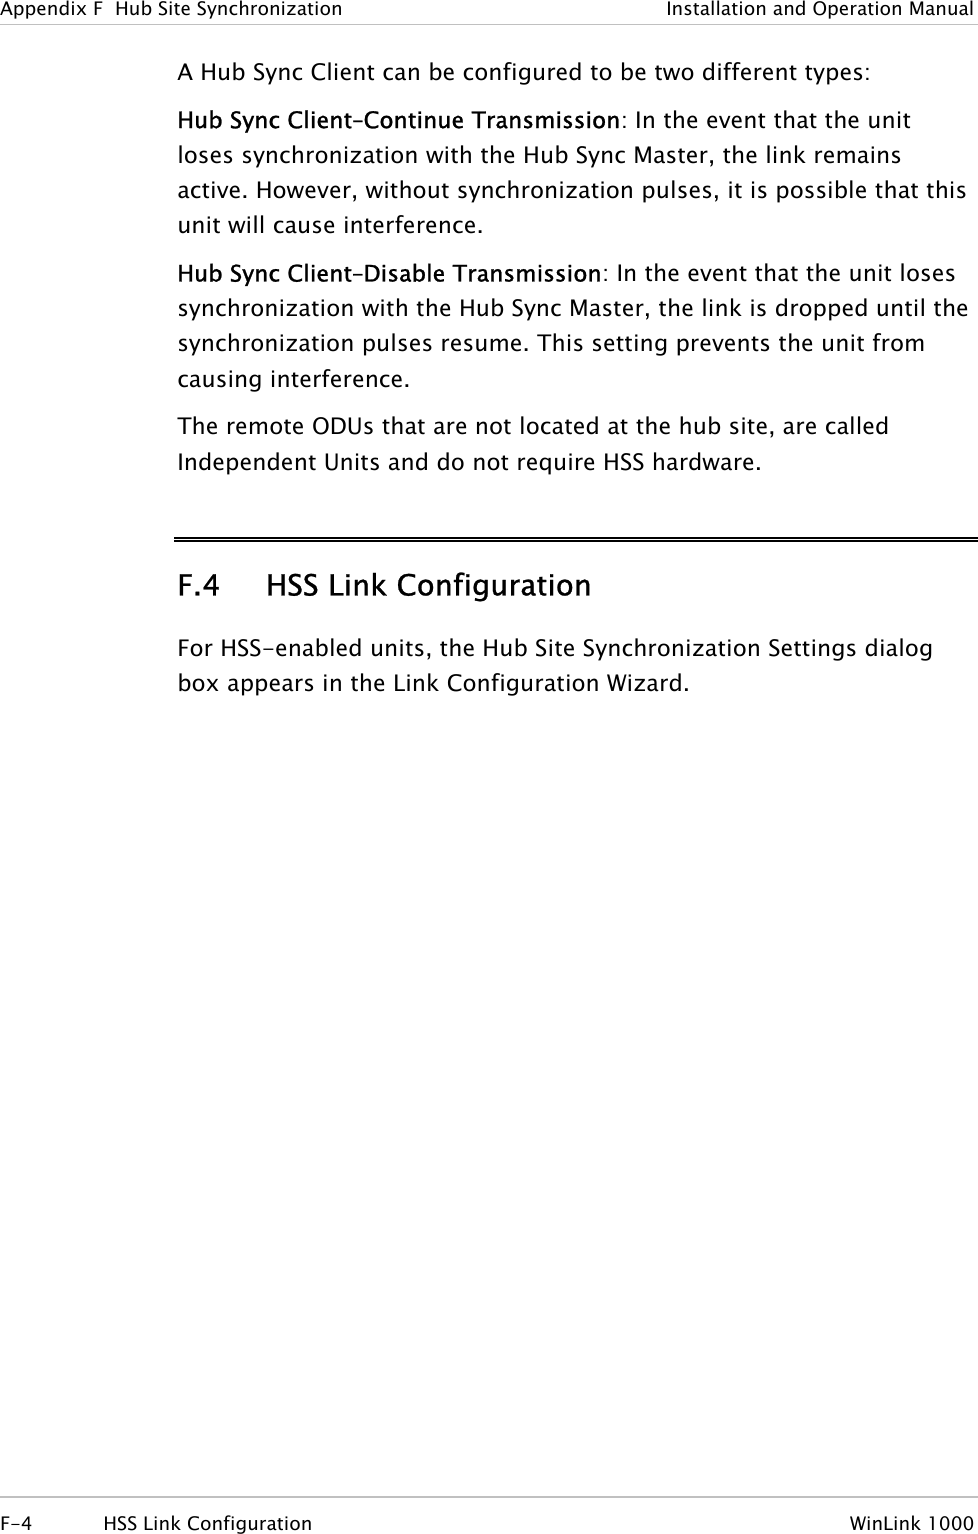 Appendix  F  Hub Site Synchronization  Installation and Operation Manual A Hub Sync Client can be configured to be two different types: Hub Sync Client–Continue Transmission: In the event that the unit loses synchronization with the Hub Sync Master, the link remains active. However, without synchronization pulses, it is possible that this unit will cause interference. Hub Sync Client–Disable Transmission: In the event that the unit loses synchronization with the Hub Sync Master, the link is dropped until the synchronization pulses resume. This setting prevents the unit from causing interference. The remote ODUs that are not located at the hub site, are called Independent Units and do not require HSS hardware. F.4 HSS Link Configuration For HSS-enabled units, the Hub Site Synchronization Settings dialog box appears in the Link Configuration Wizard. F-4  HSS Link Configuration  WinLink 1000 